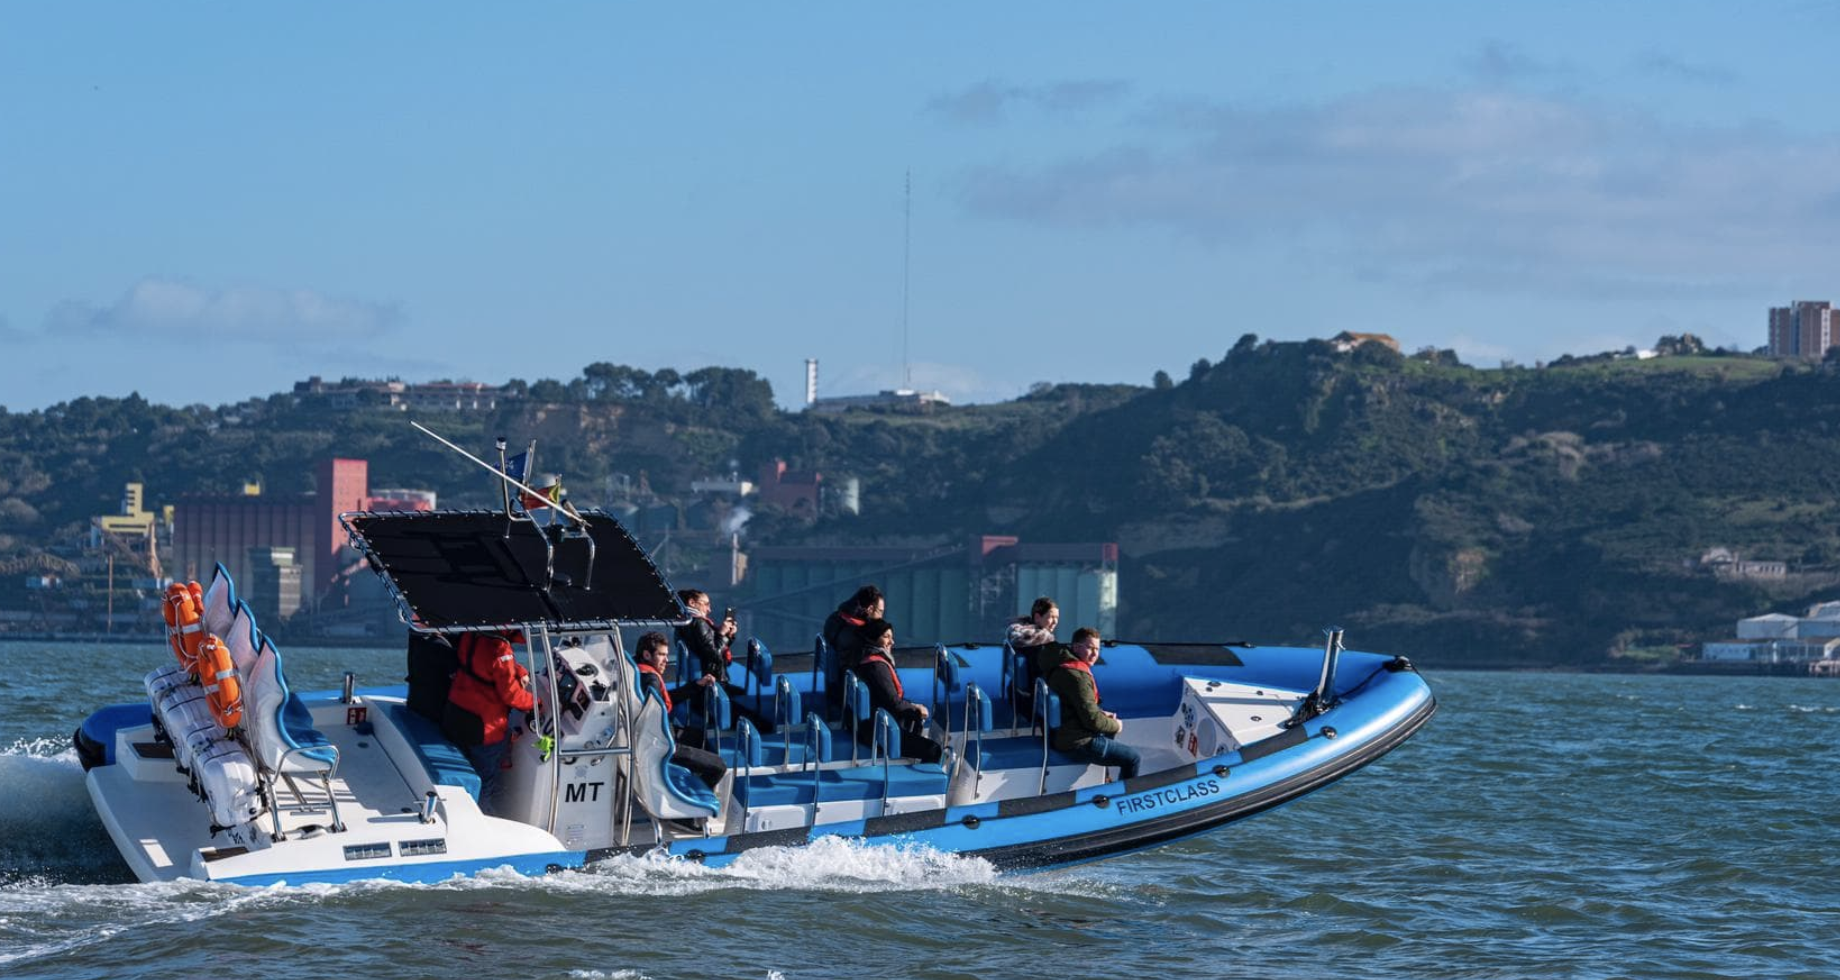 Speed Boat Tour in the Tagus River